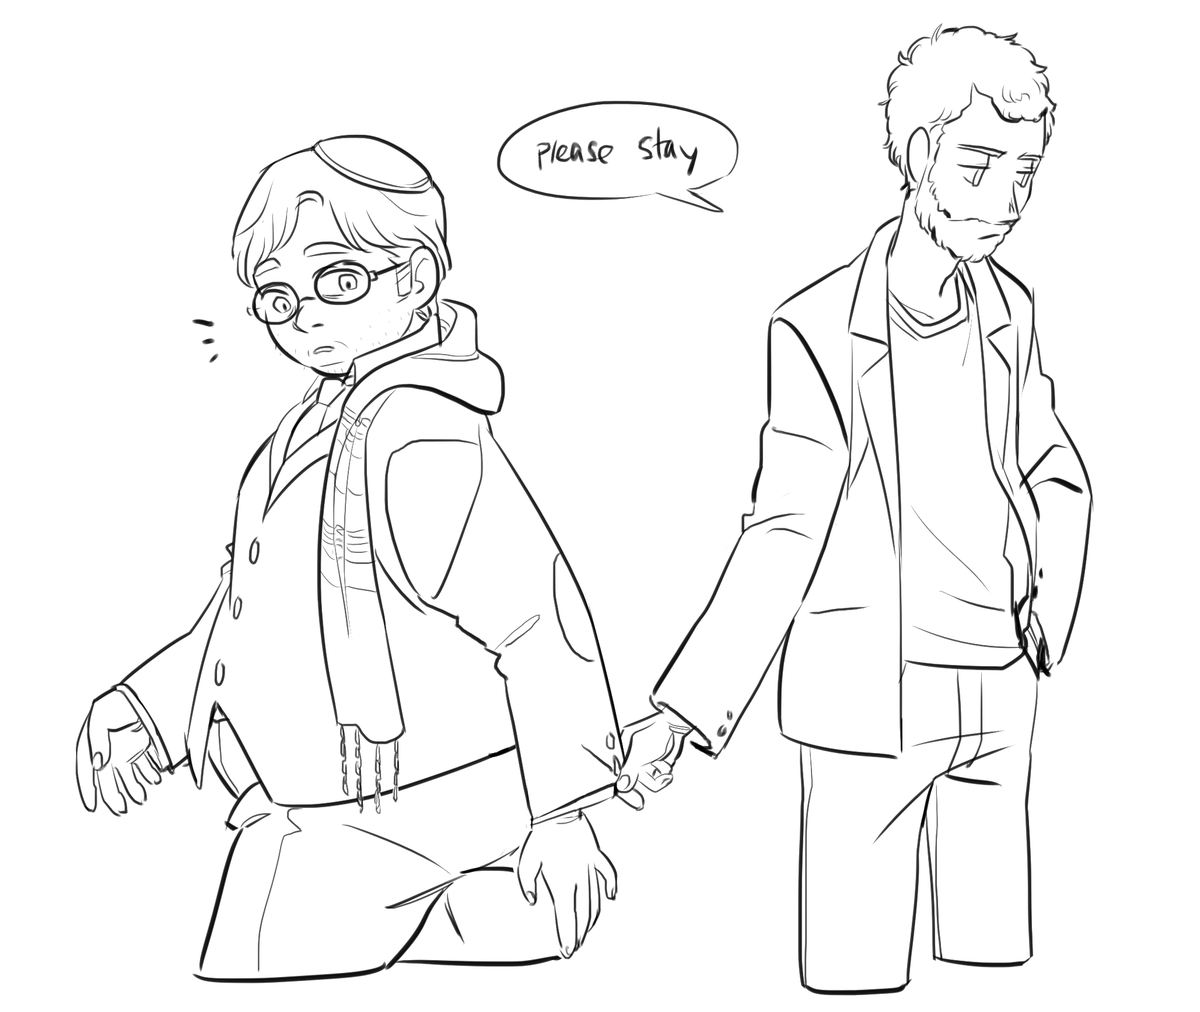 ossan doodles from the last days (part 1)

ended up cleaning anyway dsfss
also basu came up with the idea for the 2nd one 